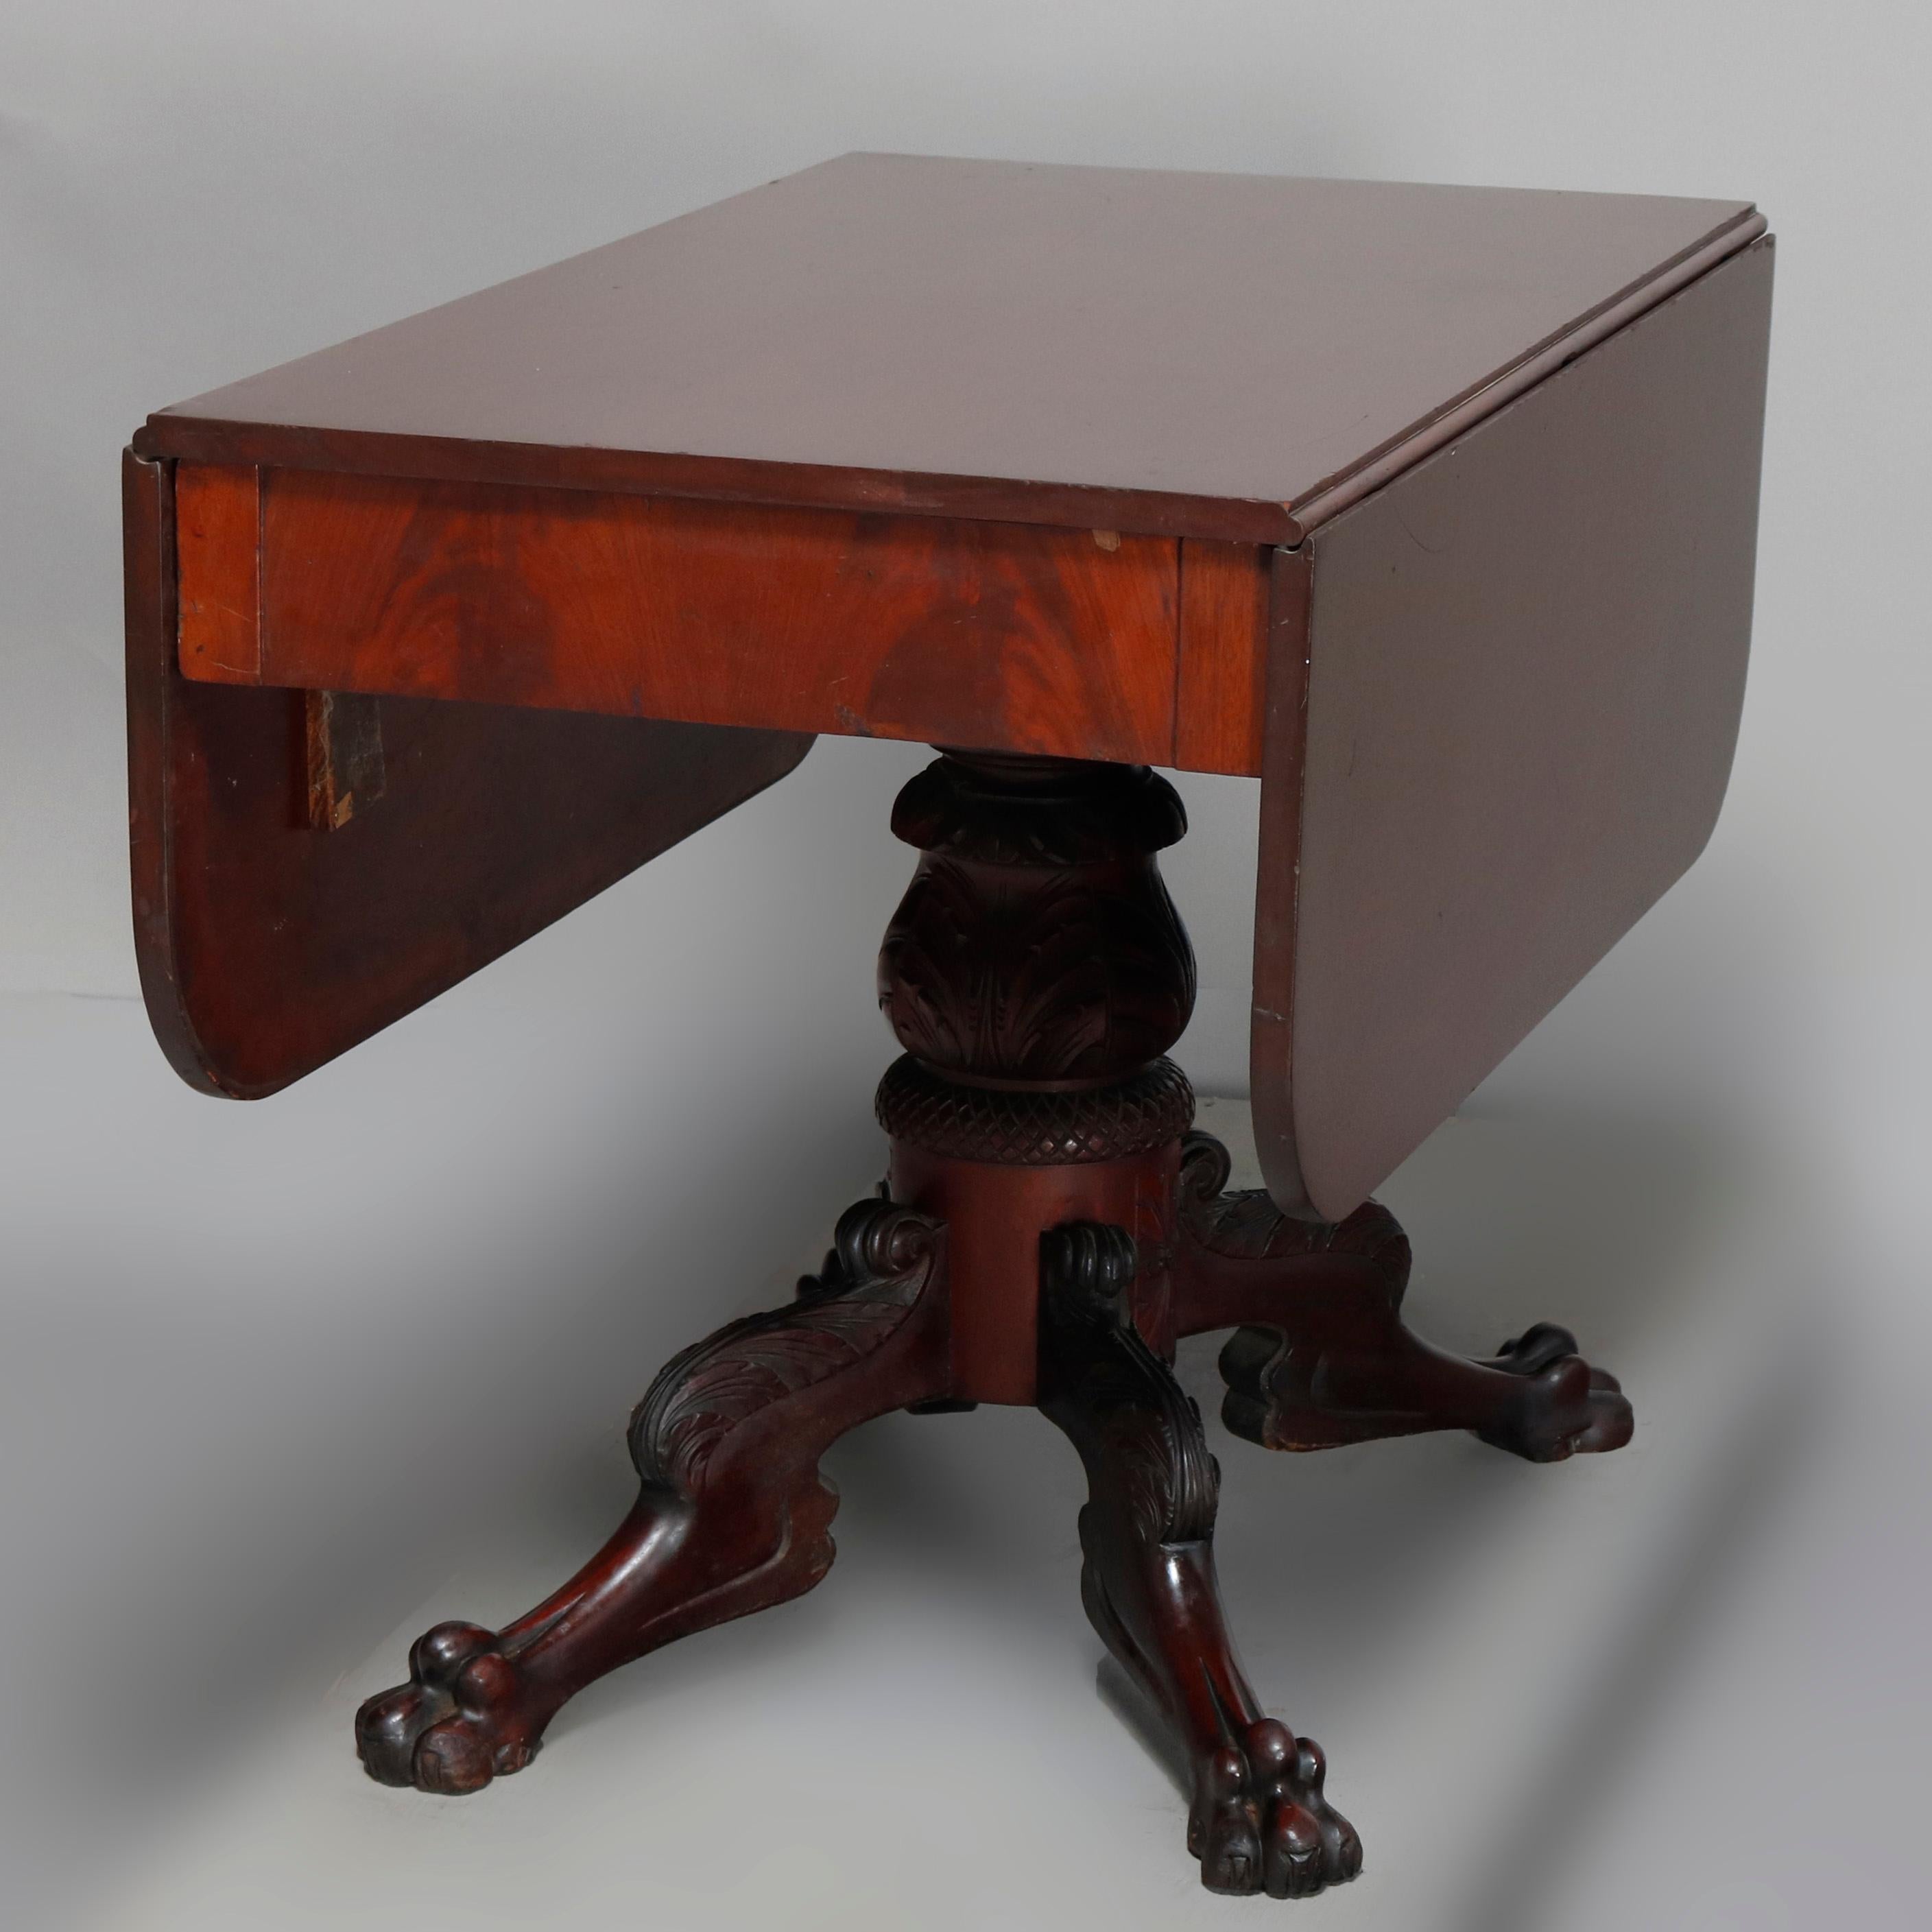 An antique classical American Empire drop-leaf table offers mahogany construction raised on acanthus carved pedestal having carved paw feet, circa 1850

Measures: 28.75